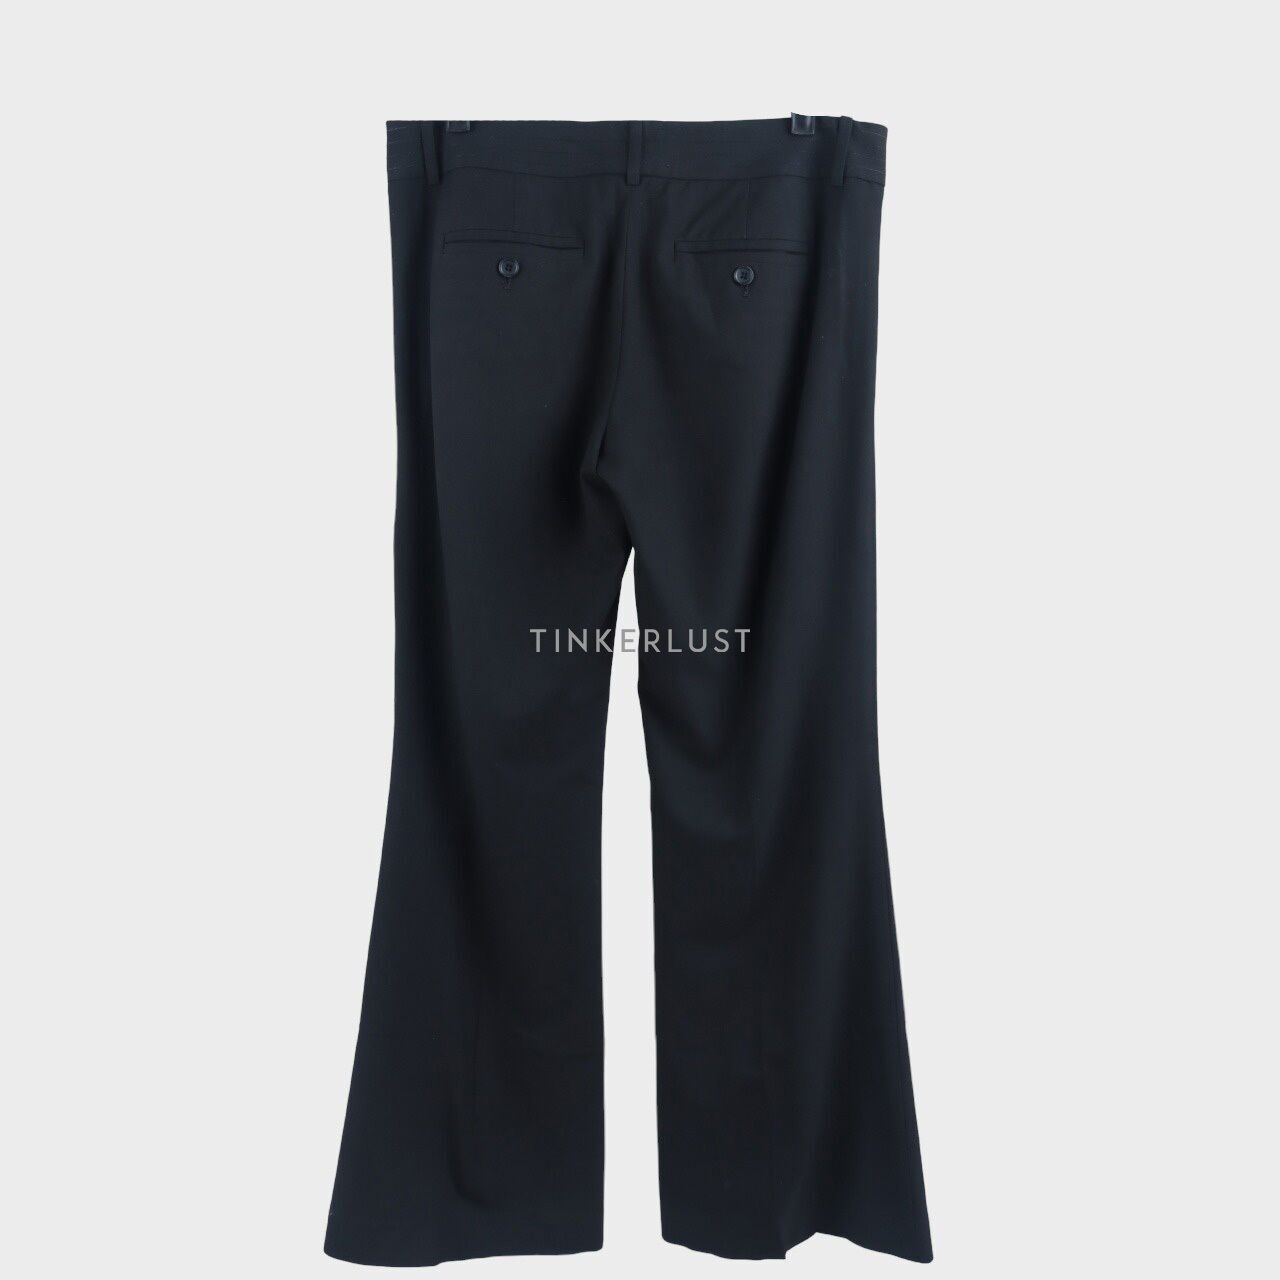 The Limited Black Long Pants